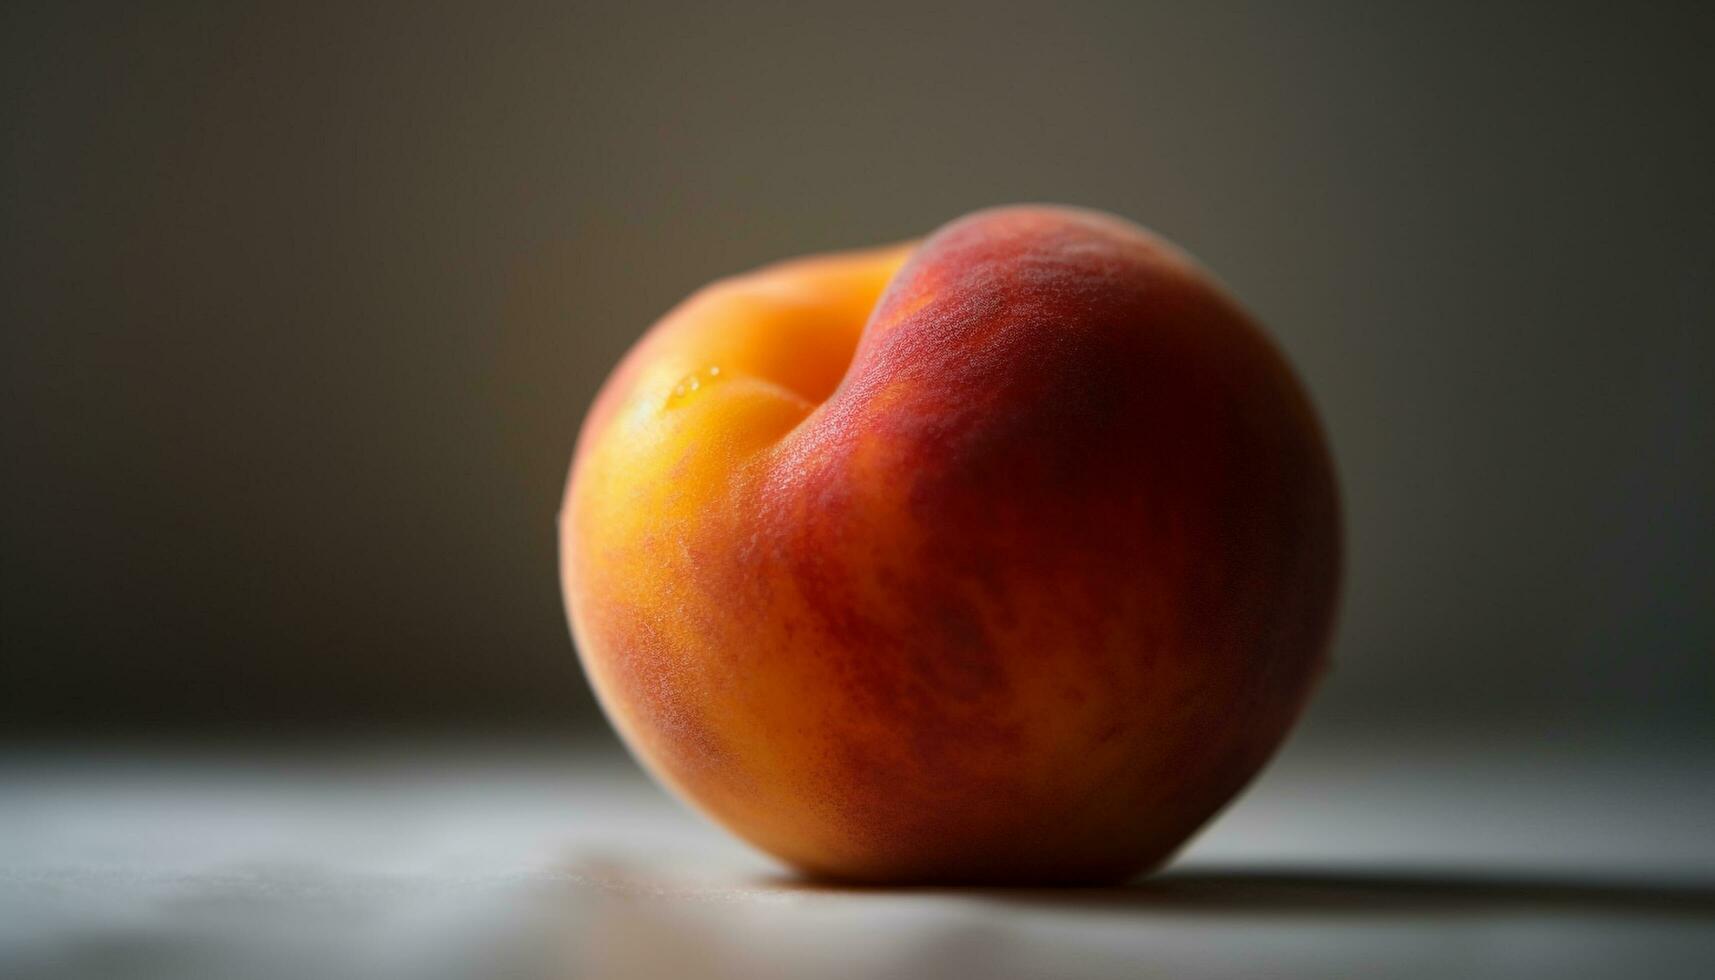 Juicy peach, ripe and fresh, a healthy snack from nature generated by AI photo